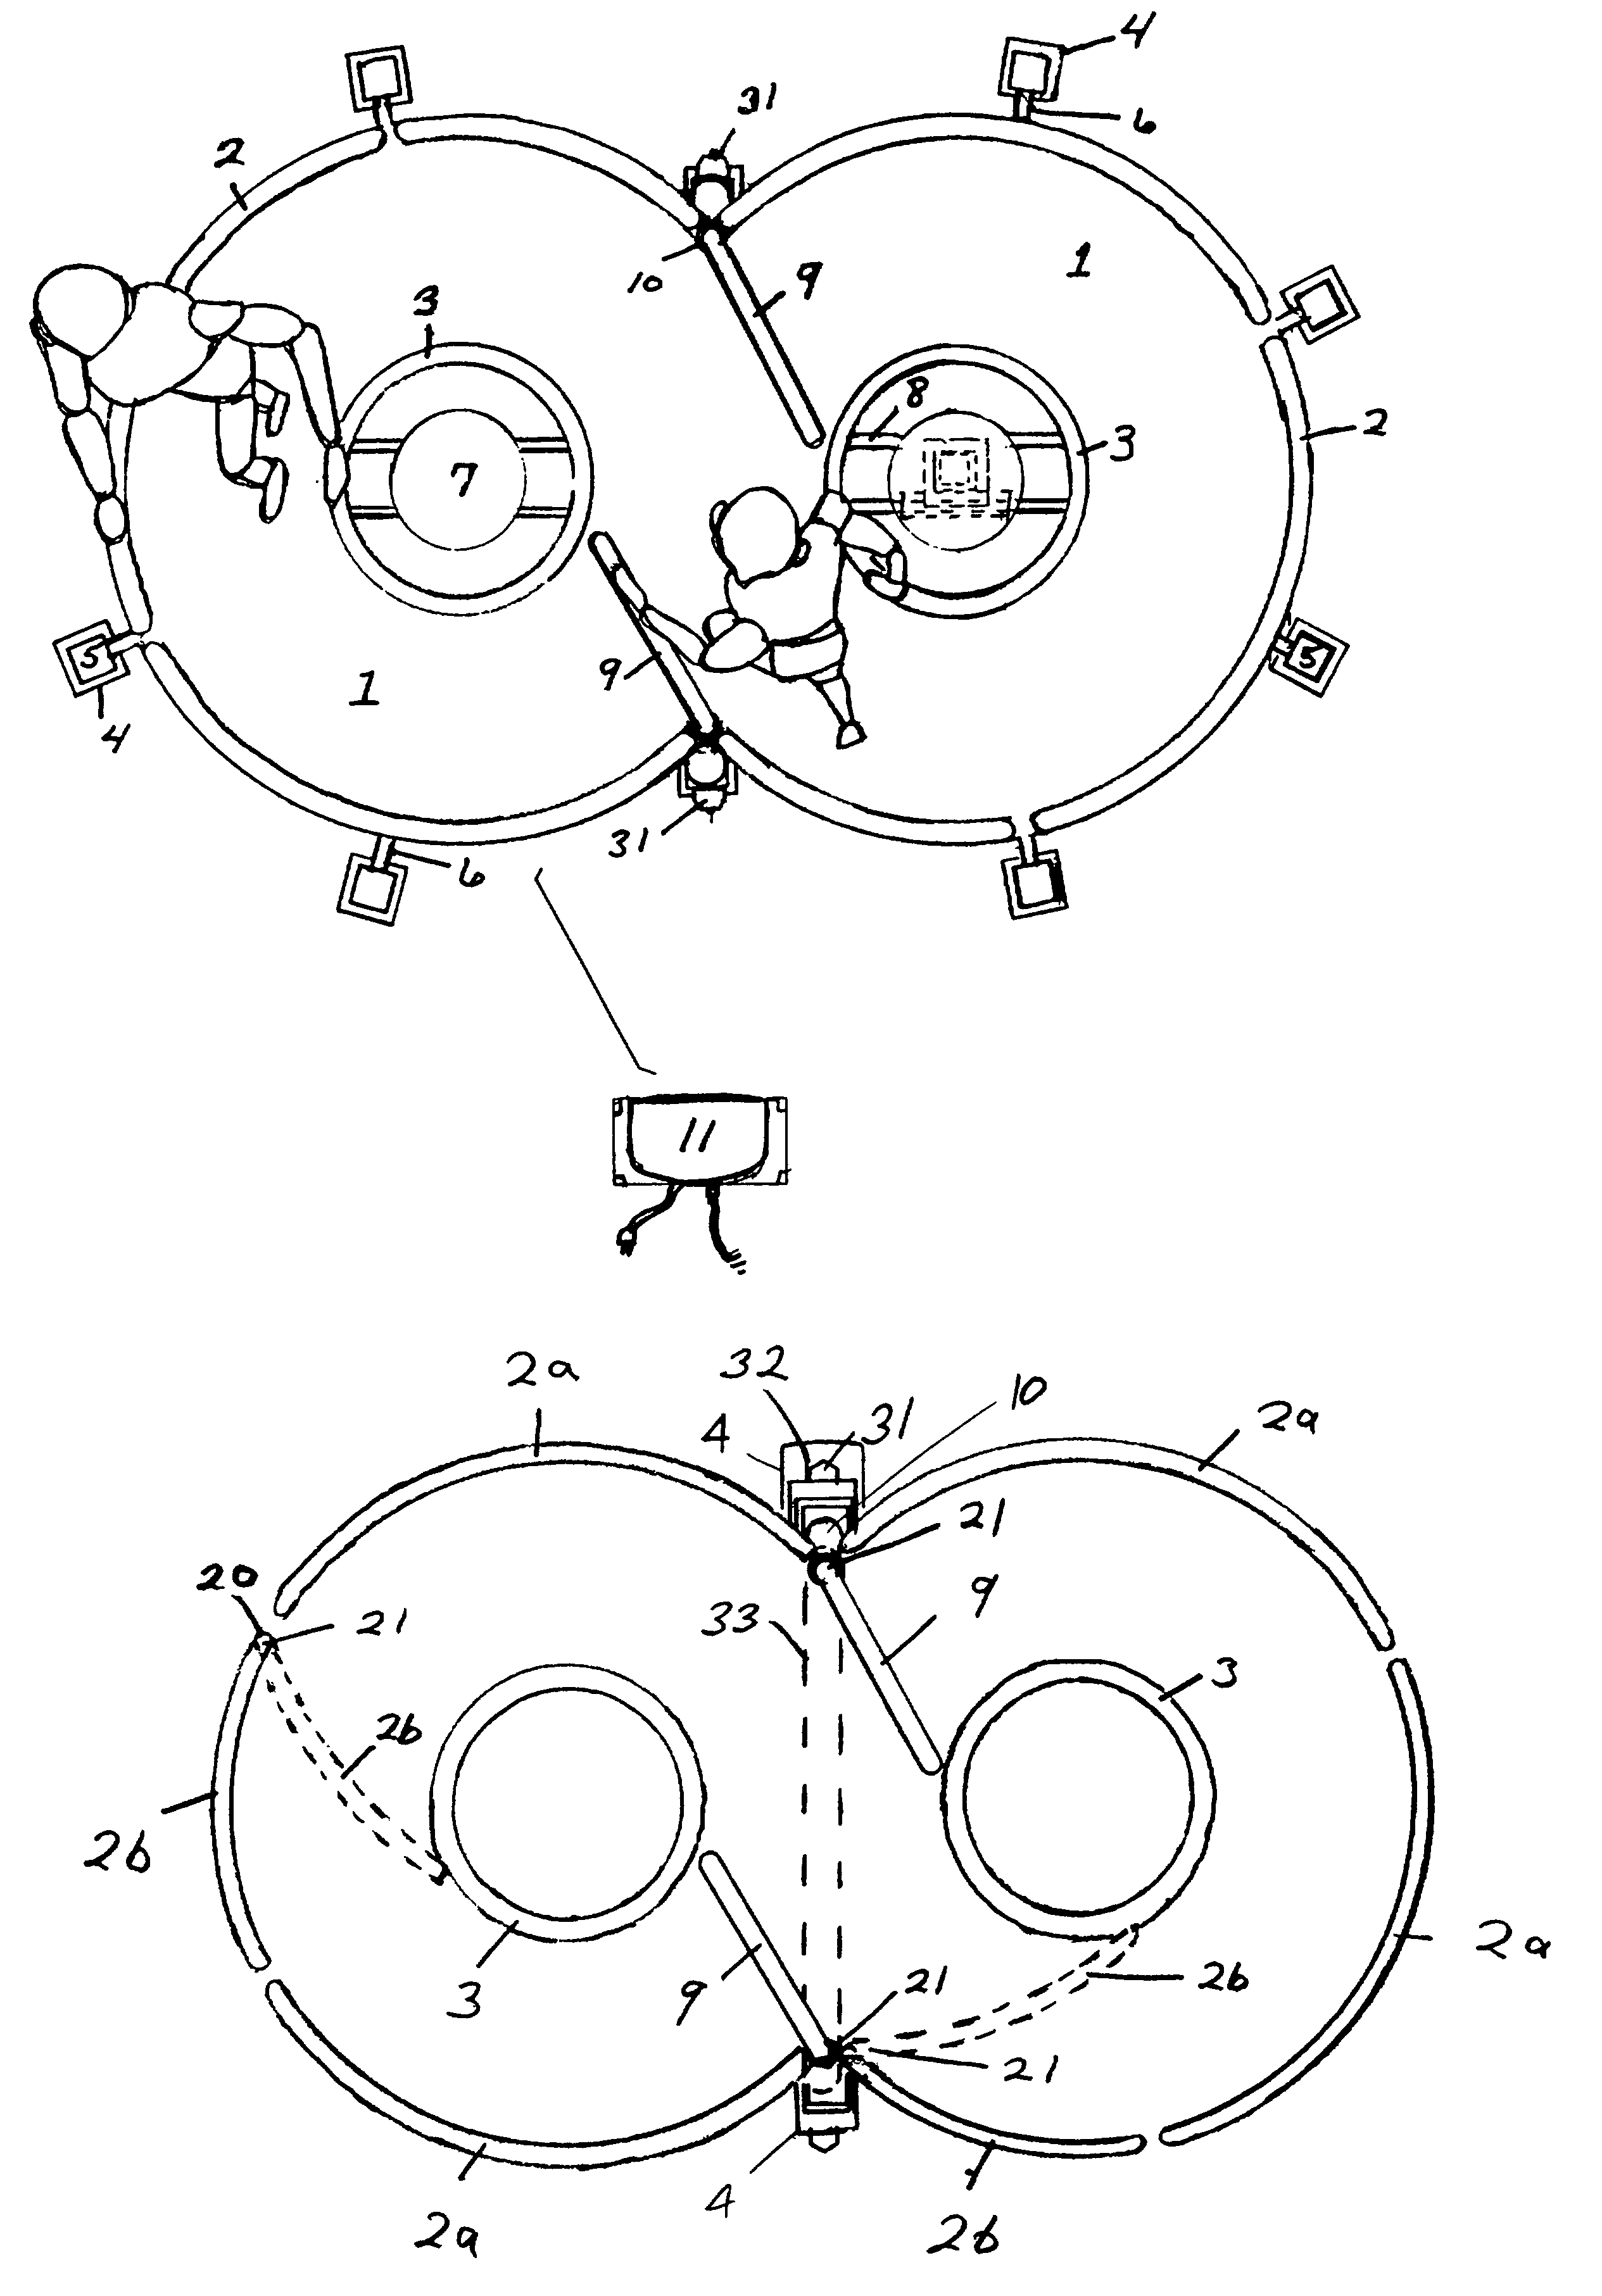 "Figure-eight" track, apparatus and method for sensory-motor exercise